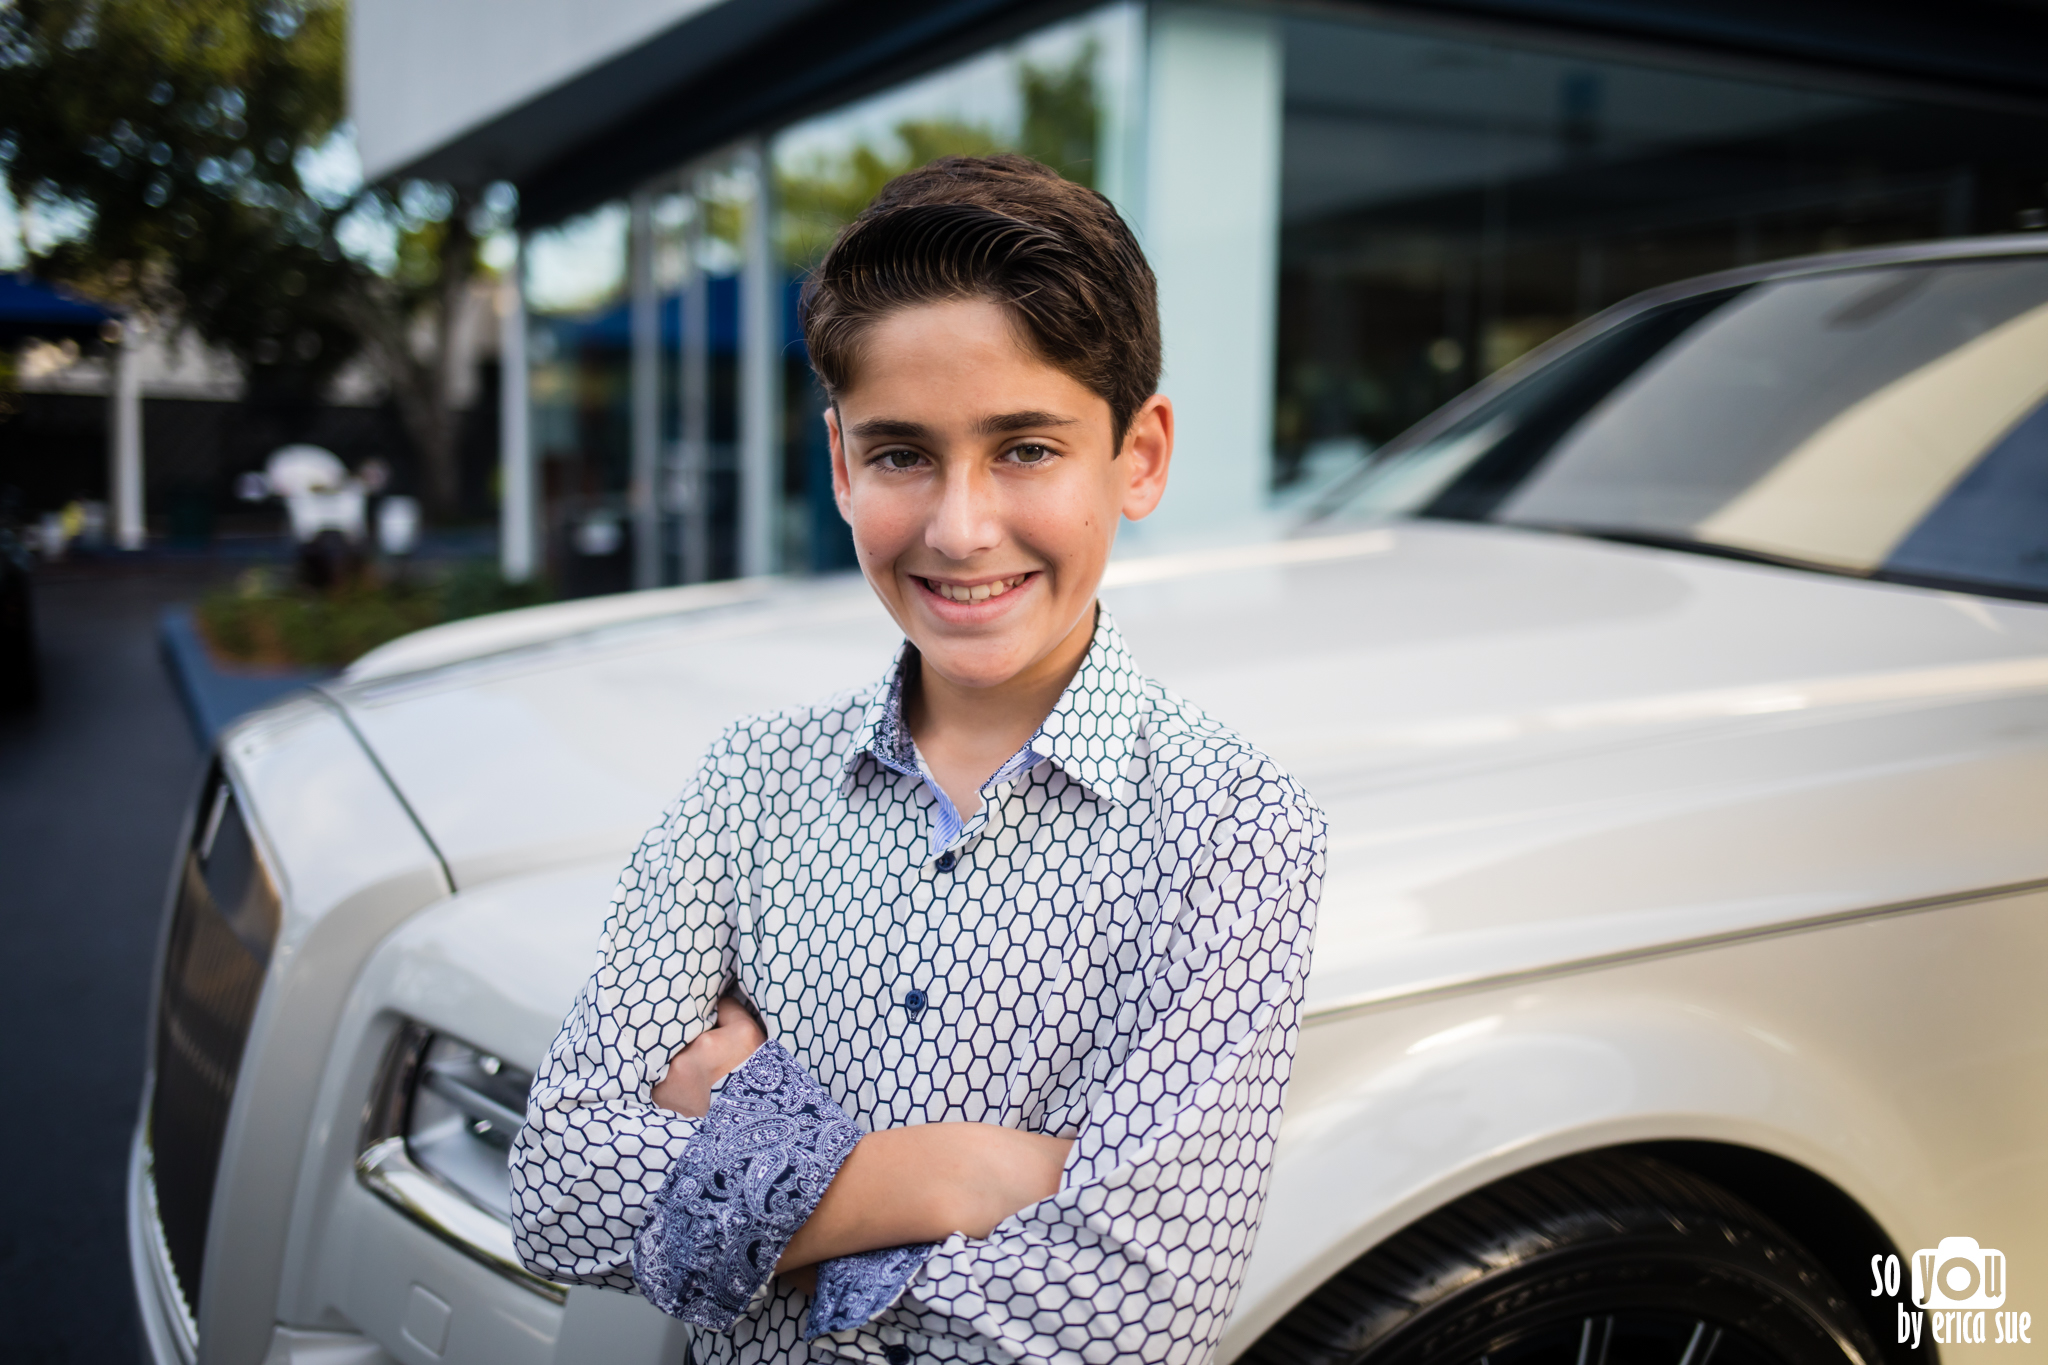 so-you-by-erica-sue-mitzvah-photographer-collection-luxury-car-ft-lauderdale-4966.jpg